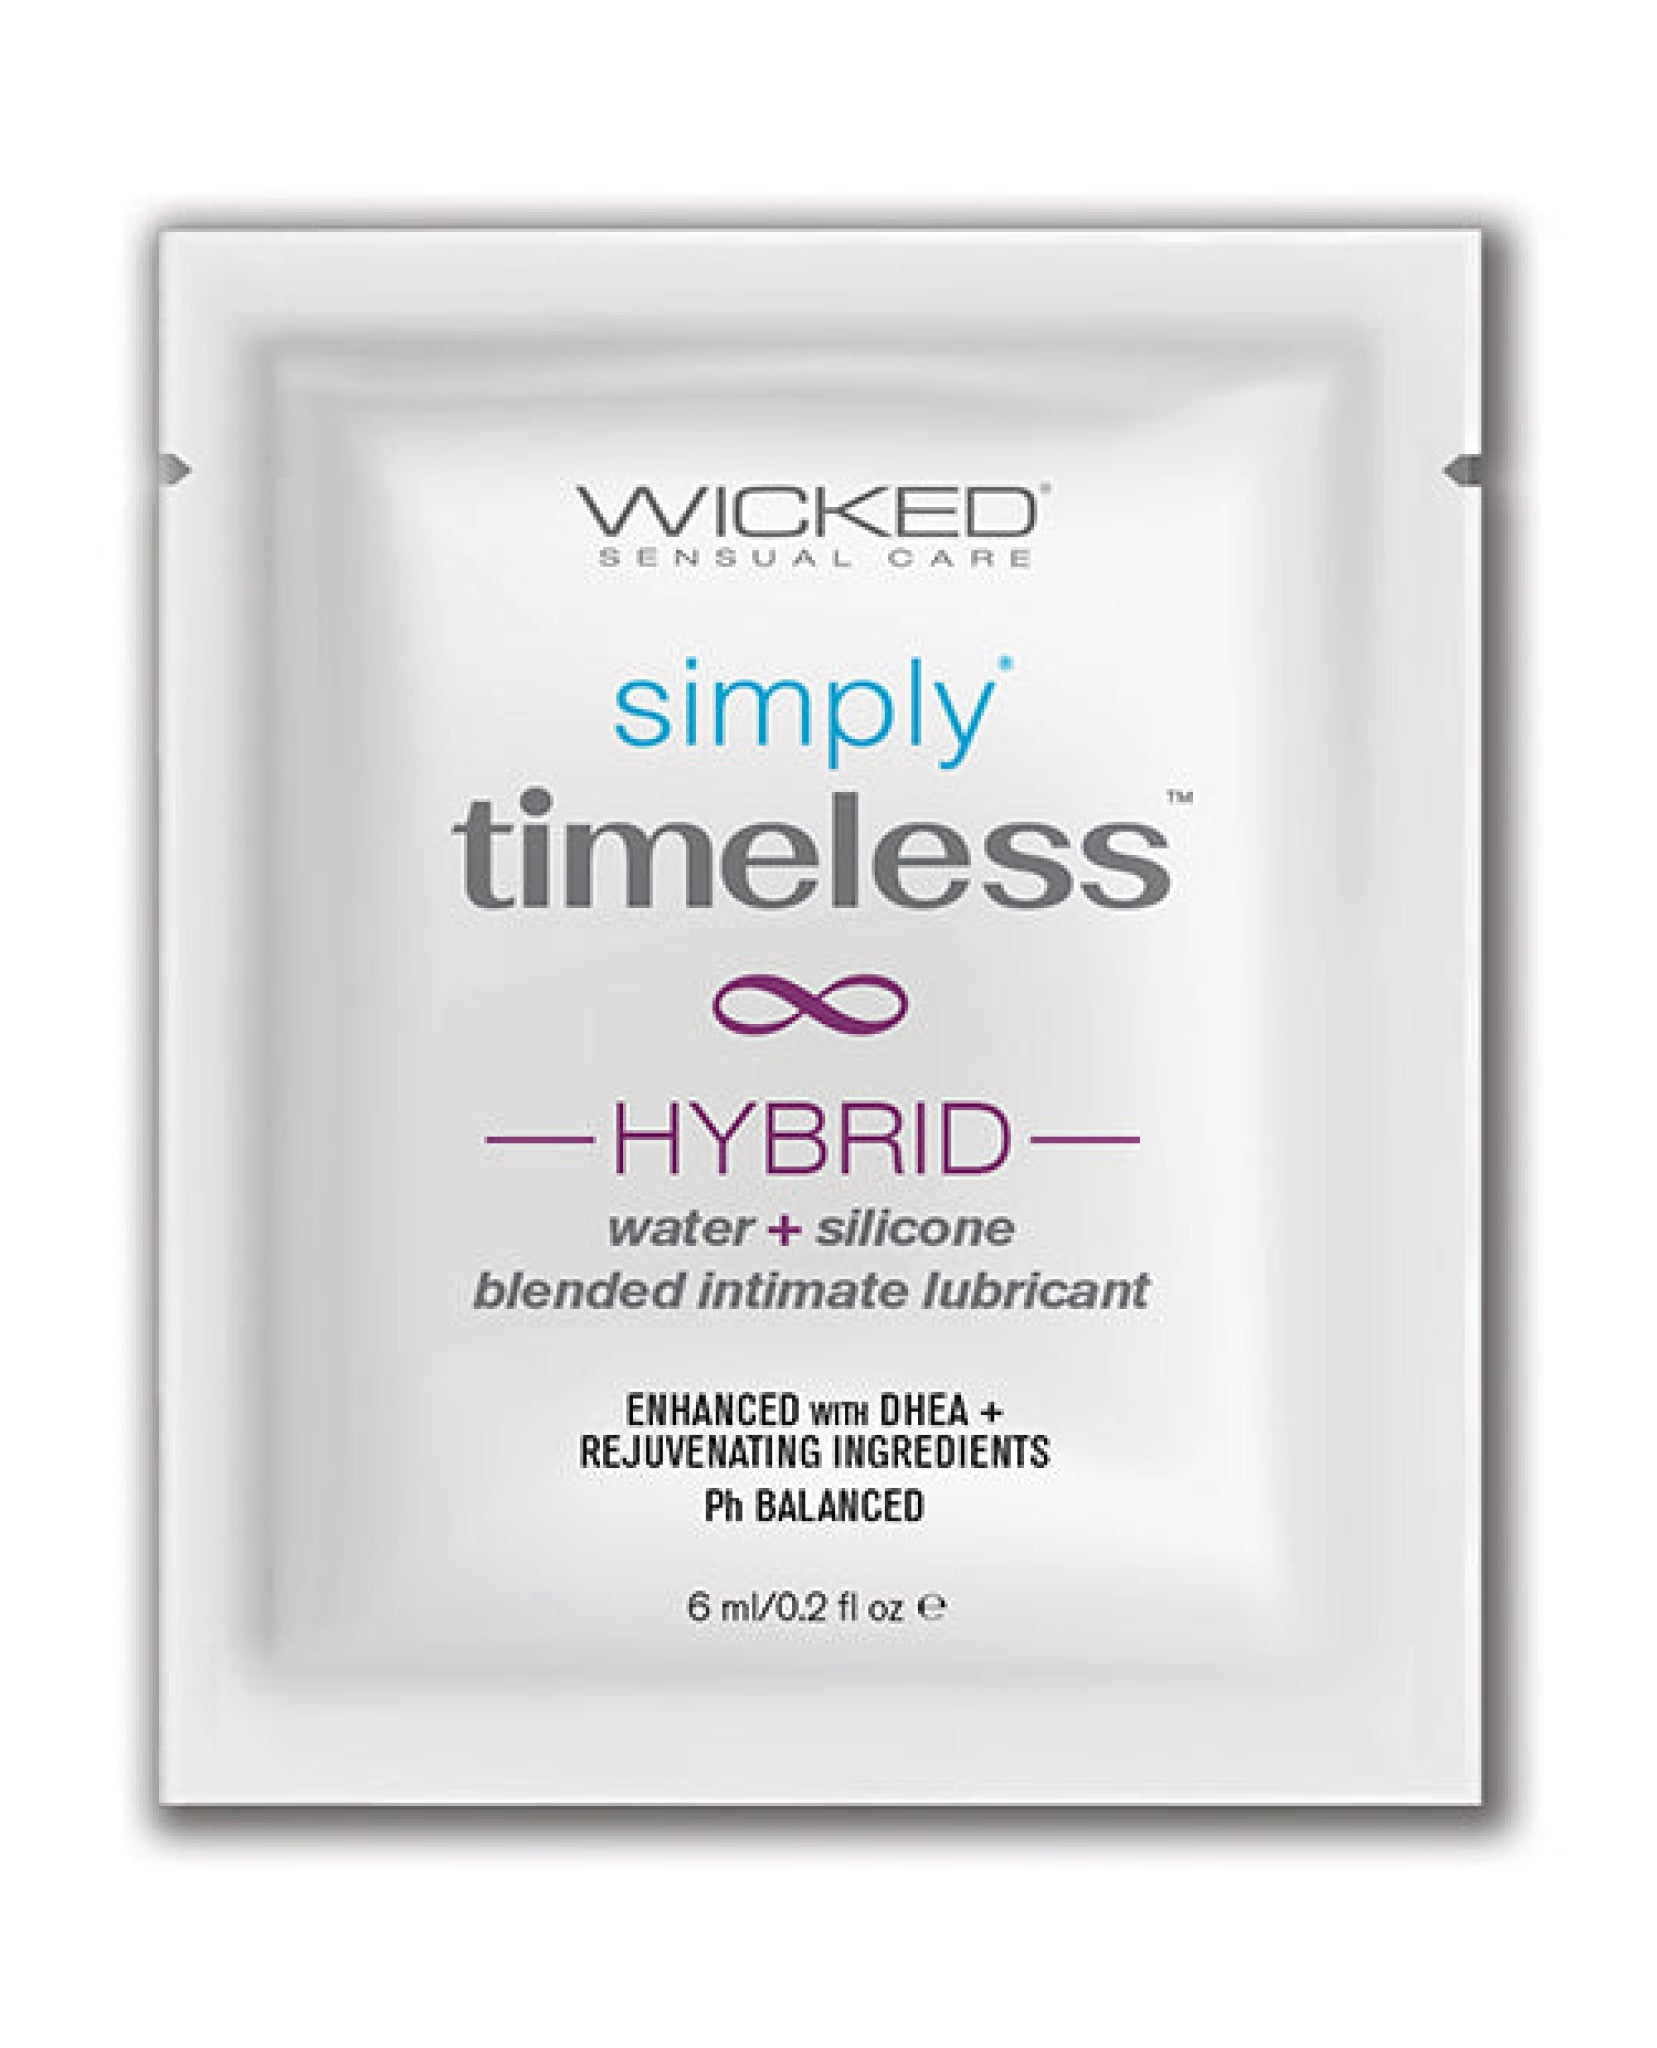 Wicked Sensual Care Simply Timeless Hybrid Water & Silicone Lubricant - oz Wicked Sensual Care